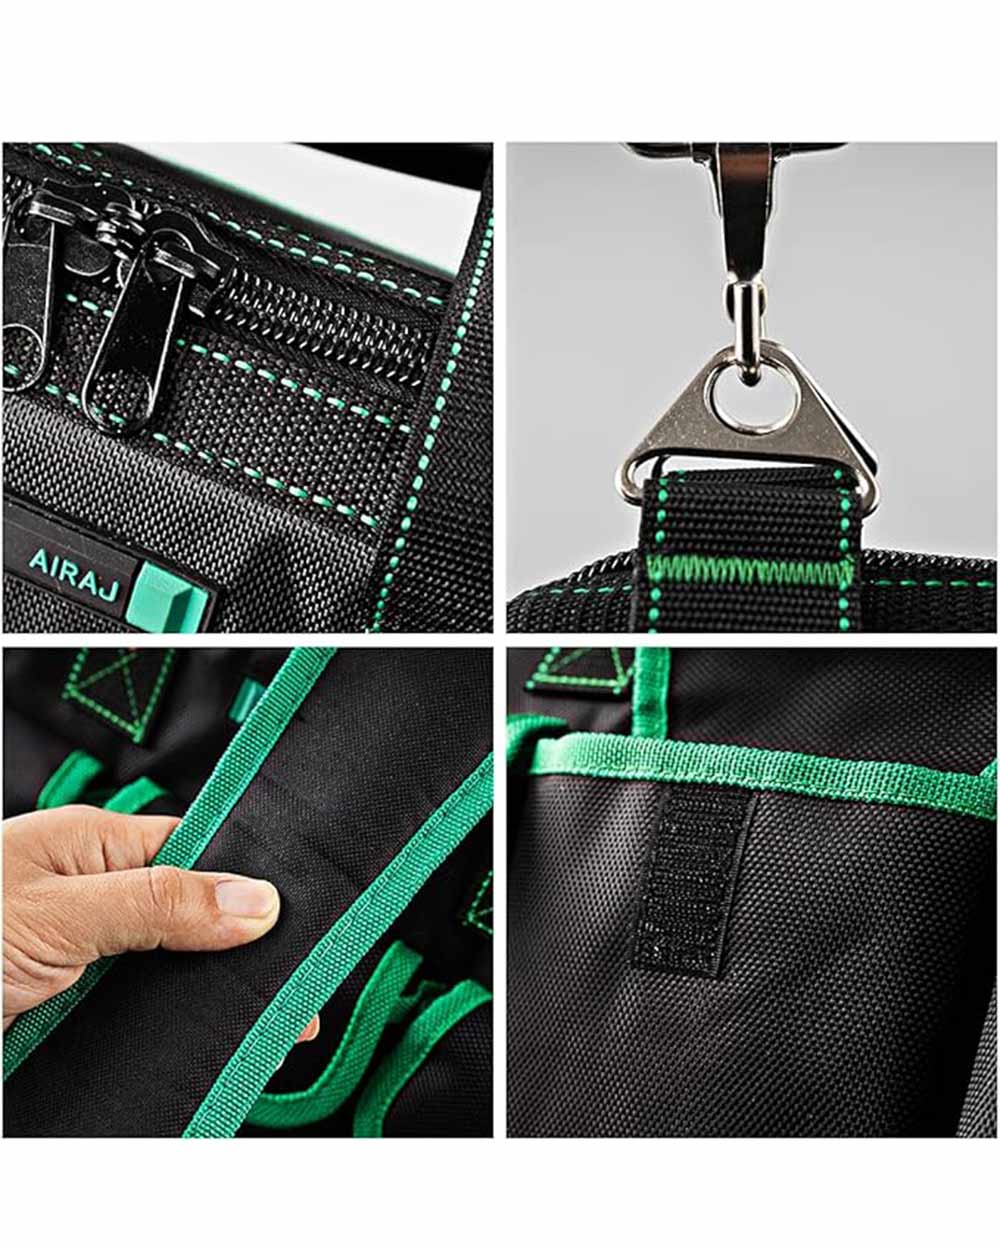 AIRAJ 16" Fabric Tool Bag with Moulded Base Black Green